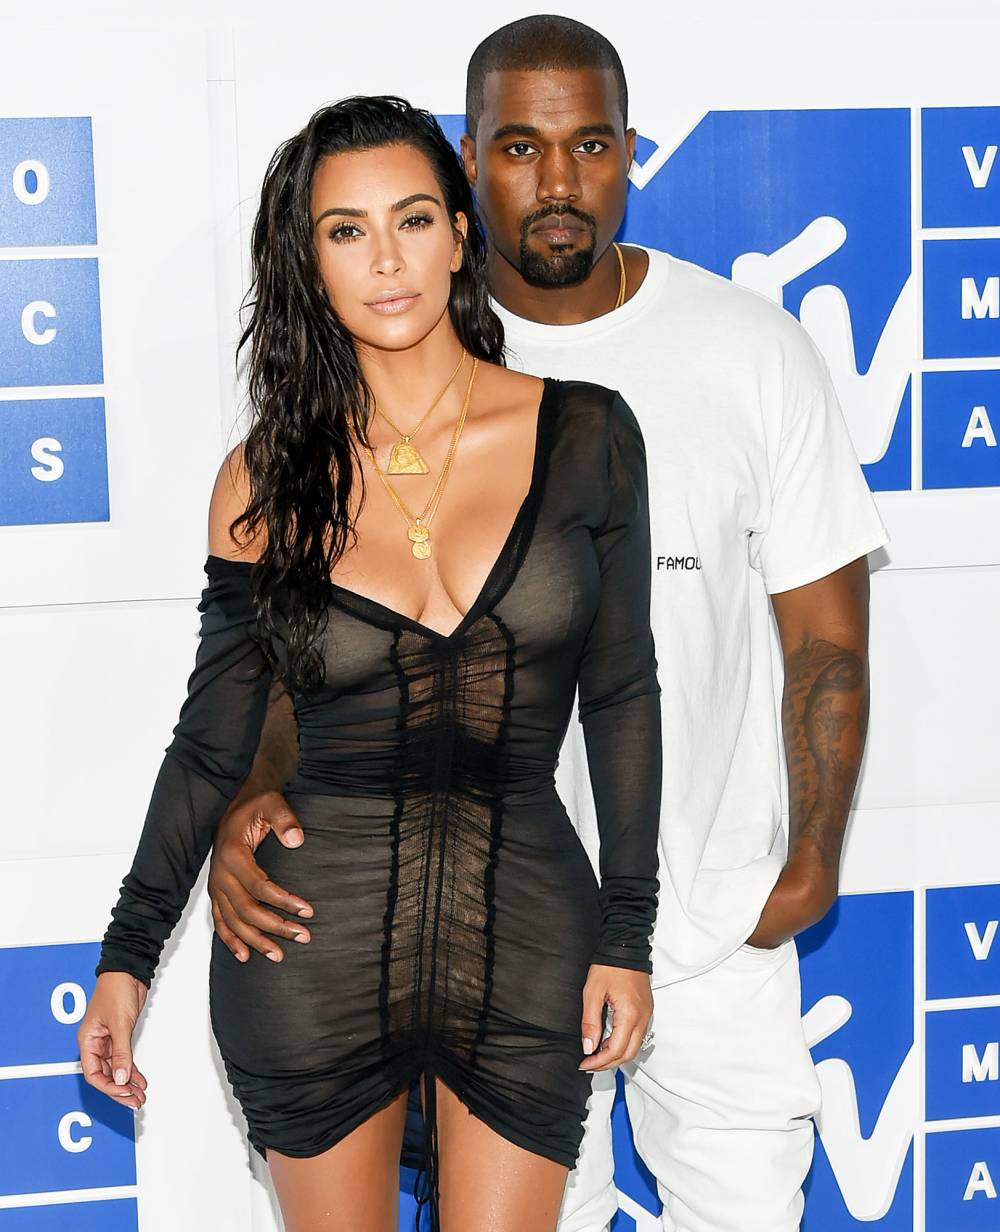 Kim Kardashian Gives Inside Look Into Her and Kanye Wests Morning Madness With 4 Kids